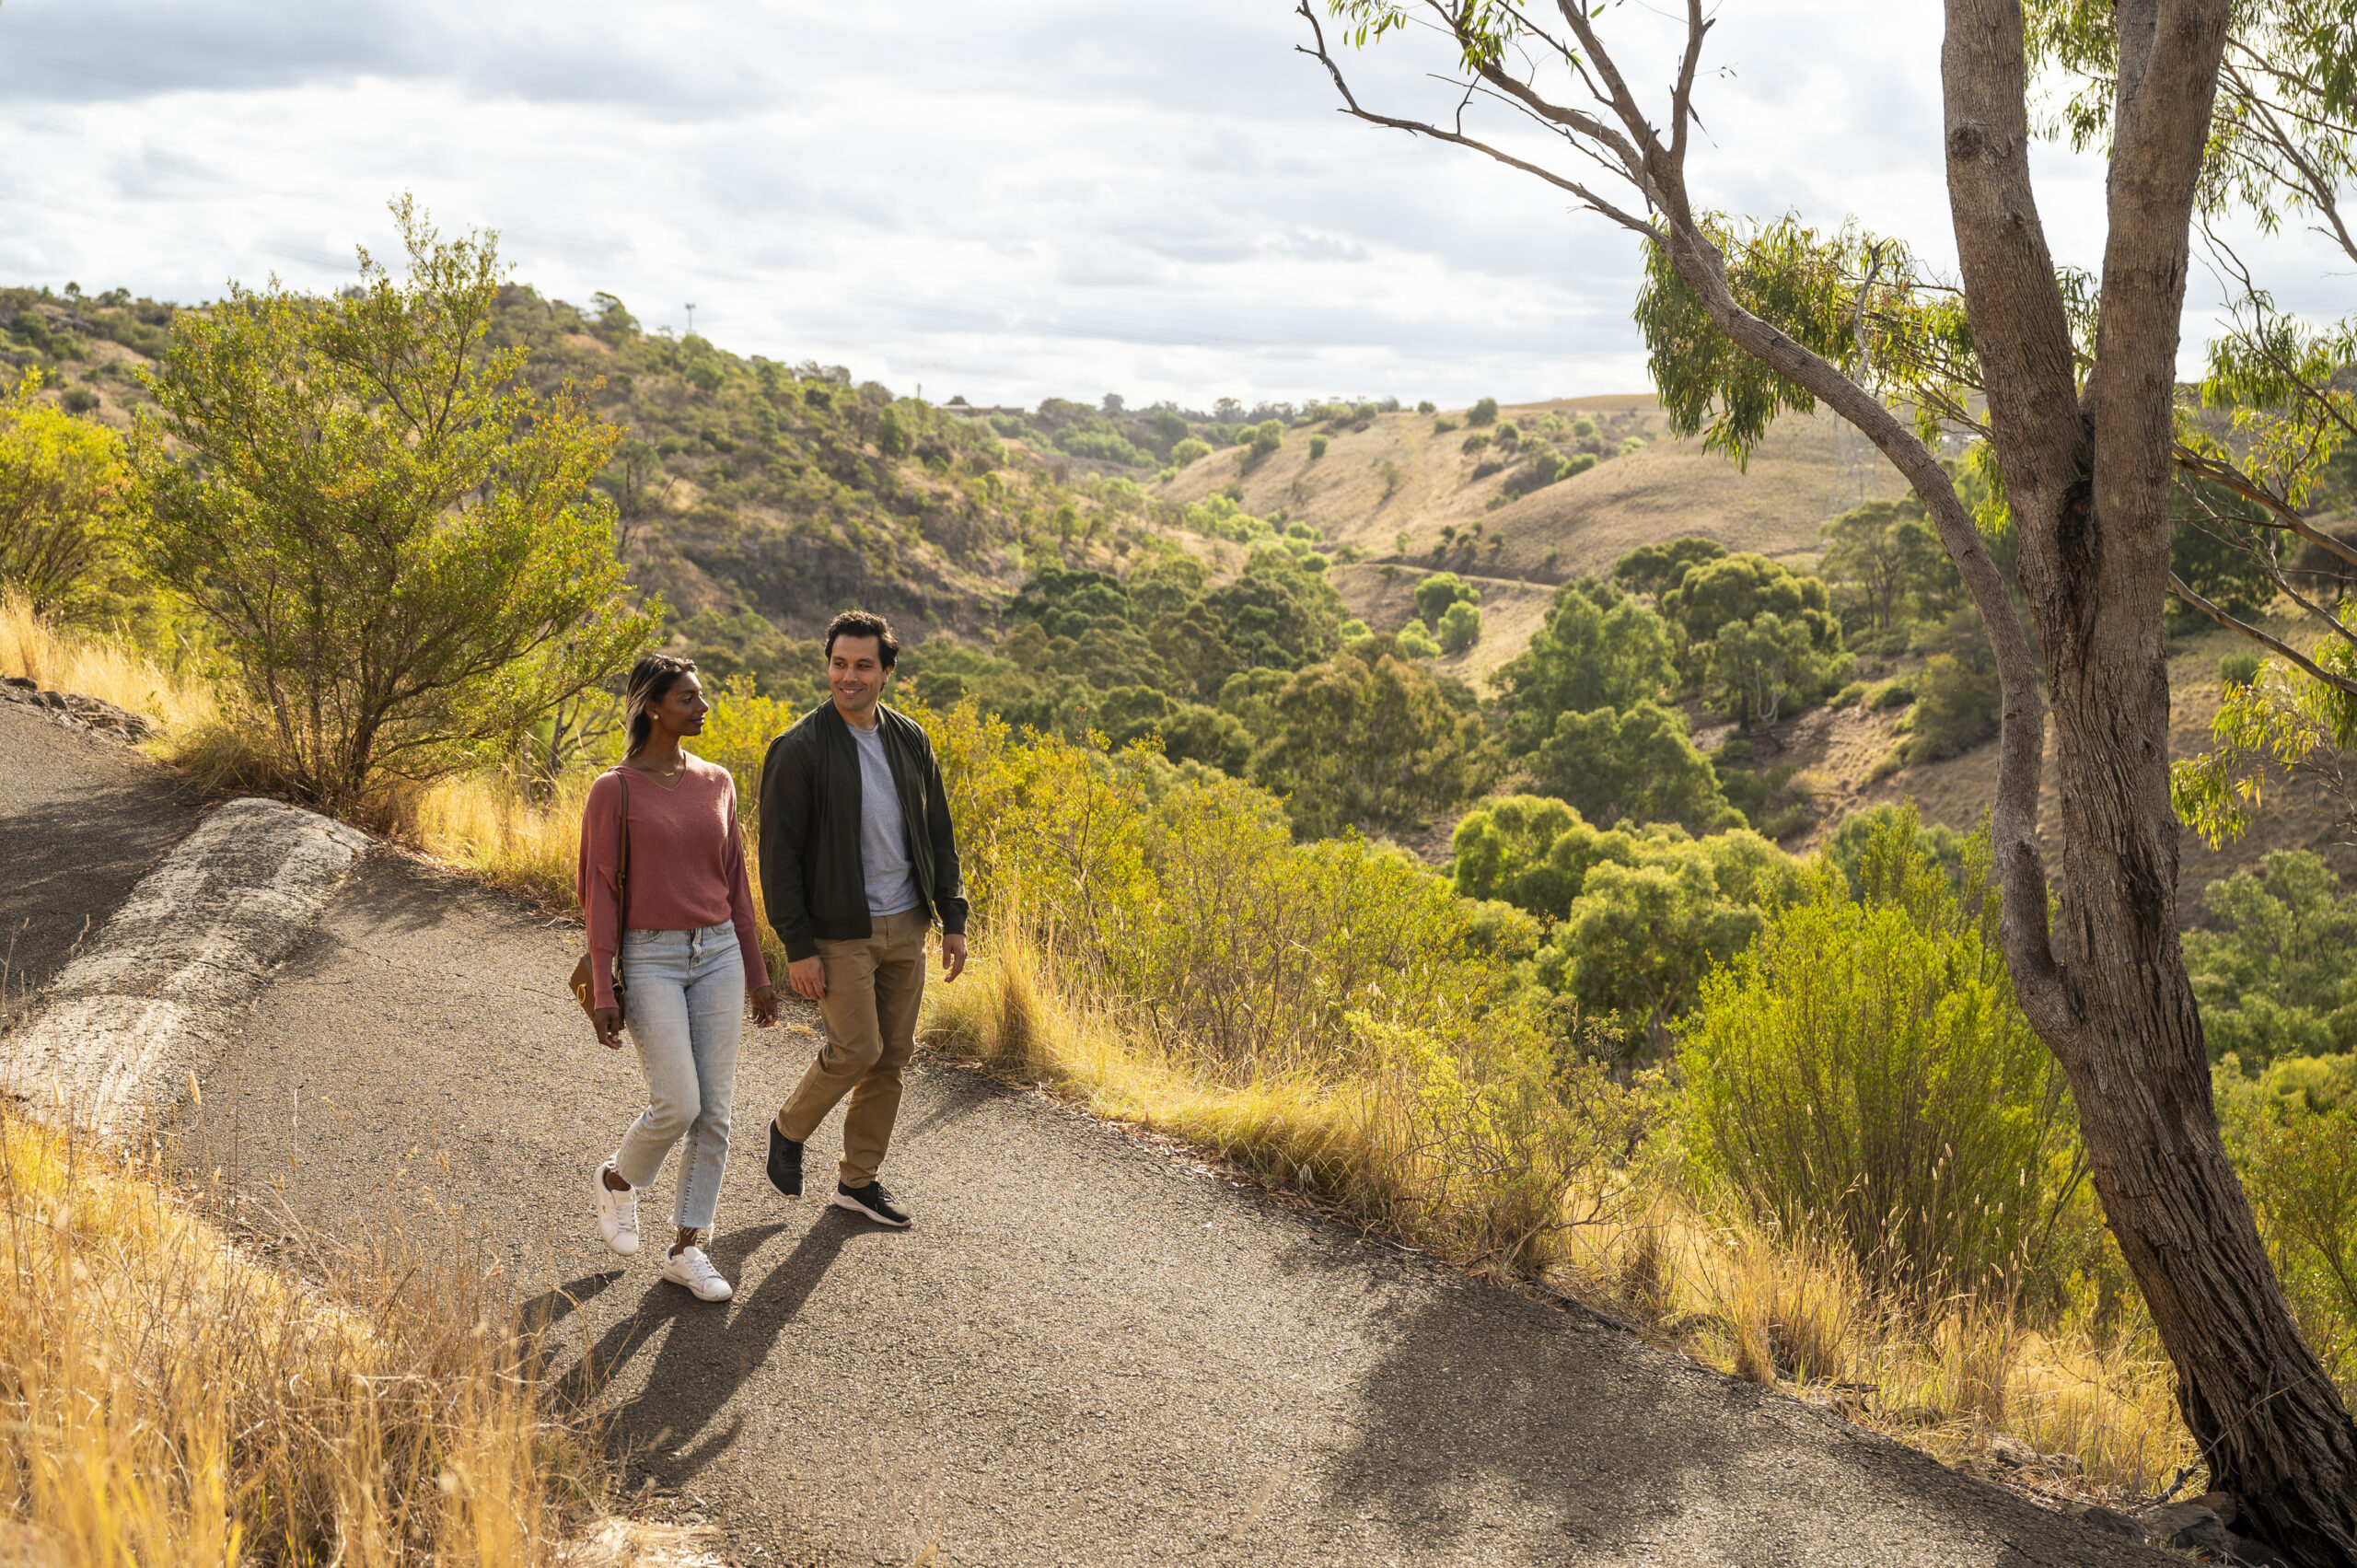 Tell us what your favourite places to visit in Brimbank are